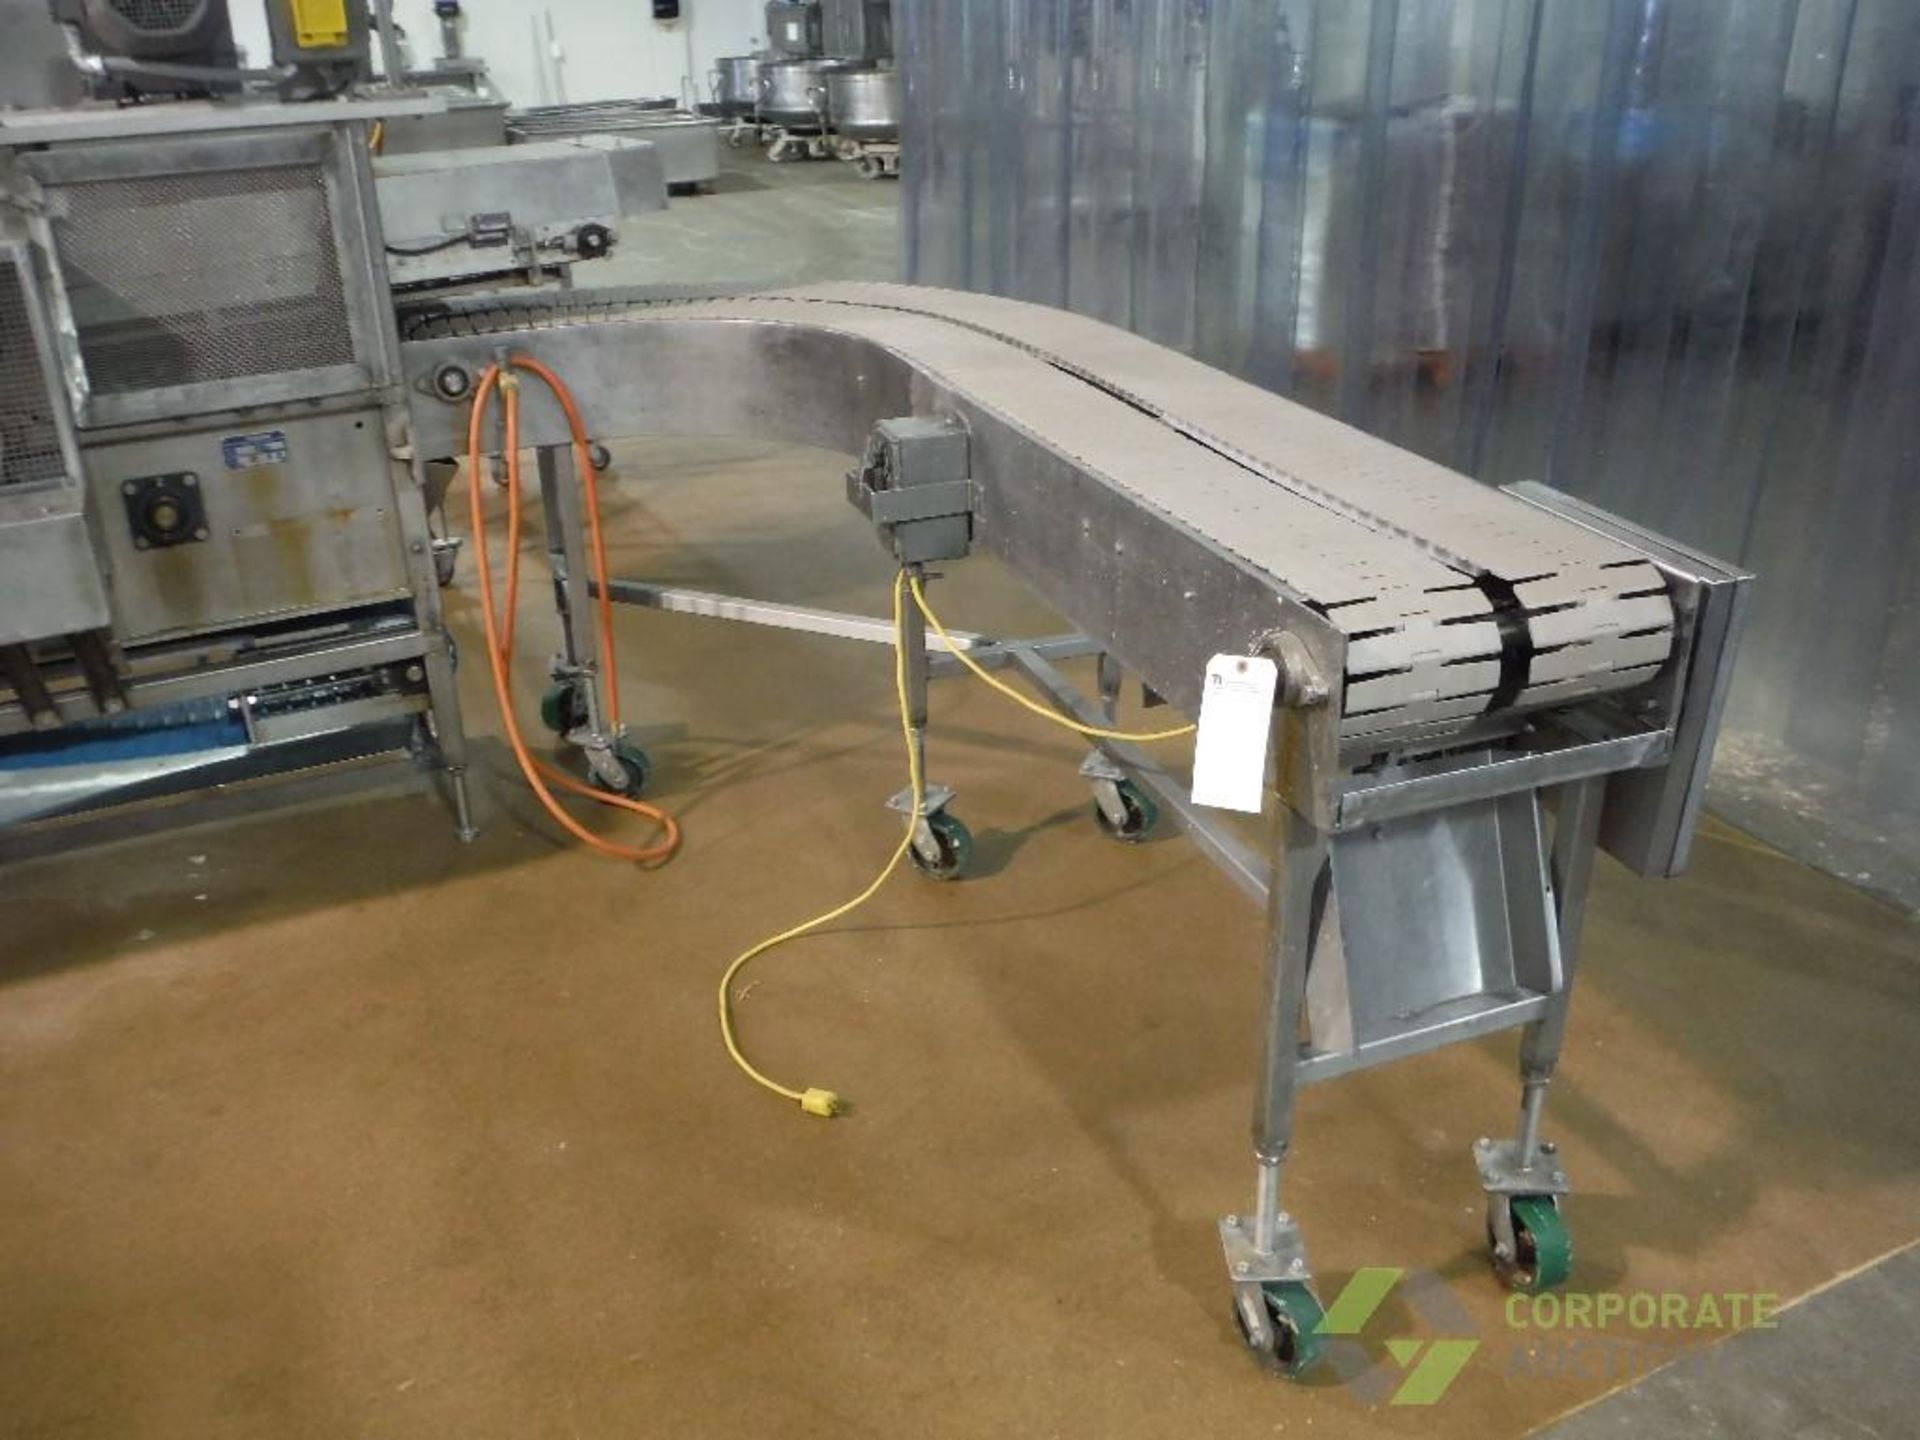 Dual lane 90 degree table top conveyor, 7.5 in. wide each belt, overall 96 in. long x 48 in. wide